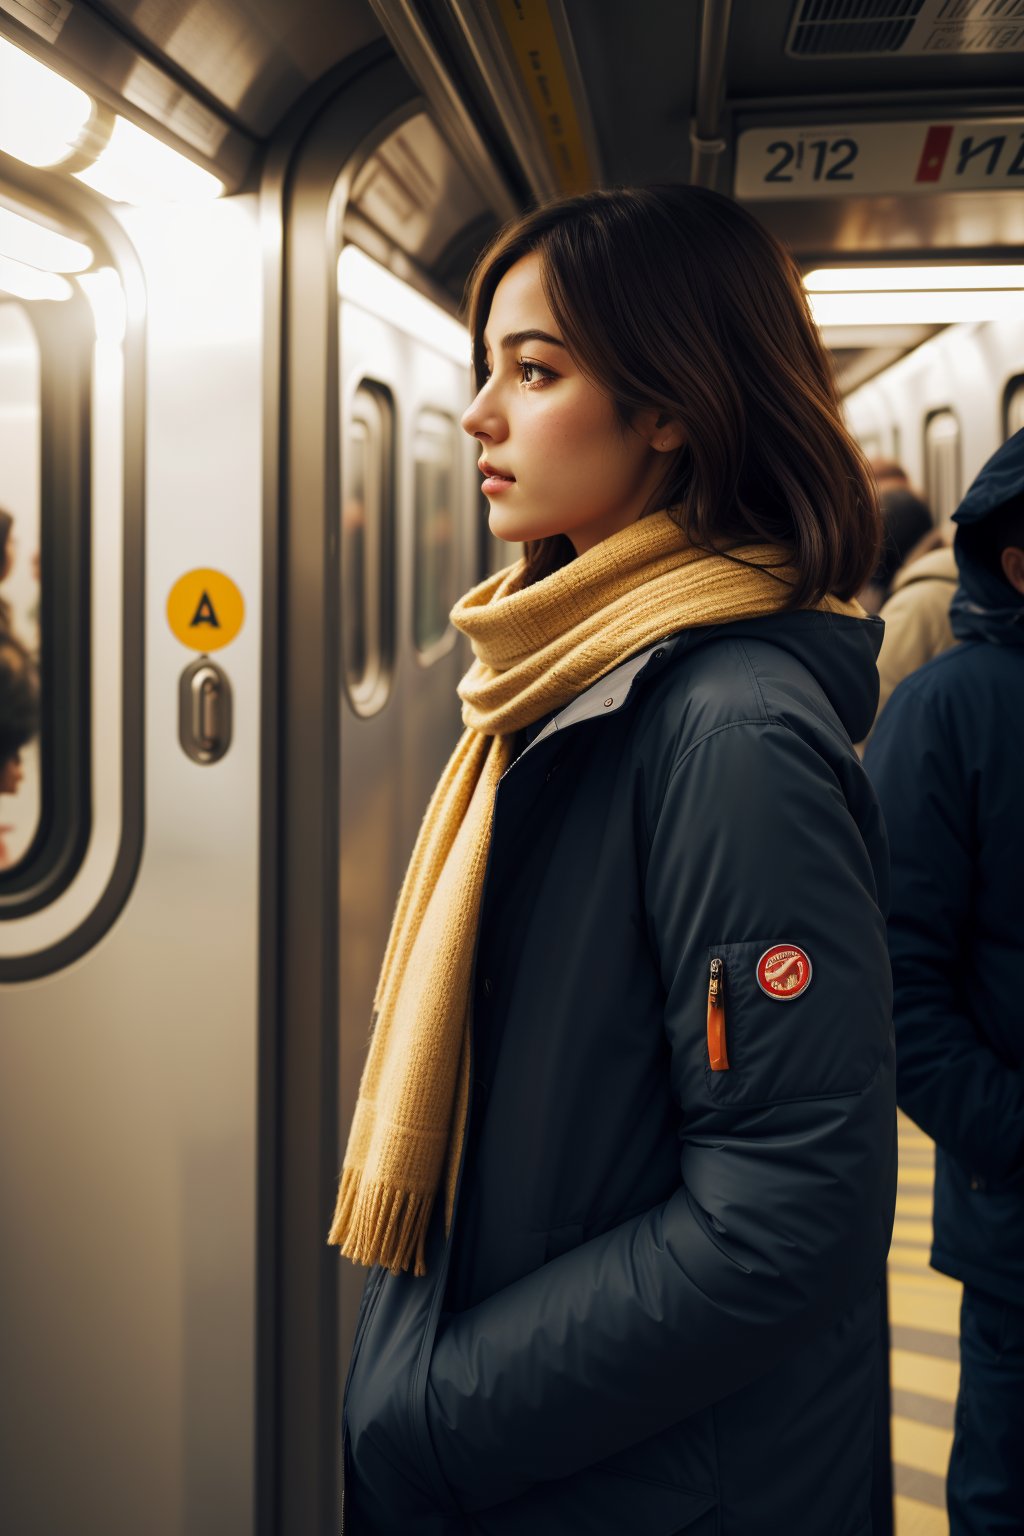 (best quality, masterpiece) photorealistic,lifelike rendering,1girl,chestnut,cowboy shot,side view,evening,night shot,a girl inside a subway station,subway train passing behind her,motion blur,film grain:1.2,winter jacket,scarf,Radiant Comfort, Golden Hour, Cozy Ambiance